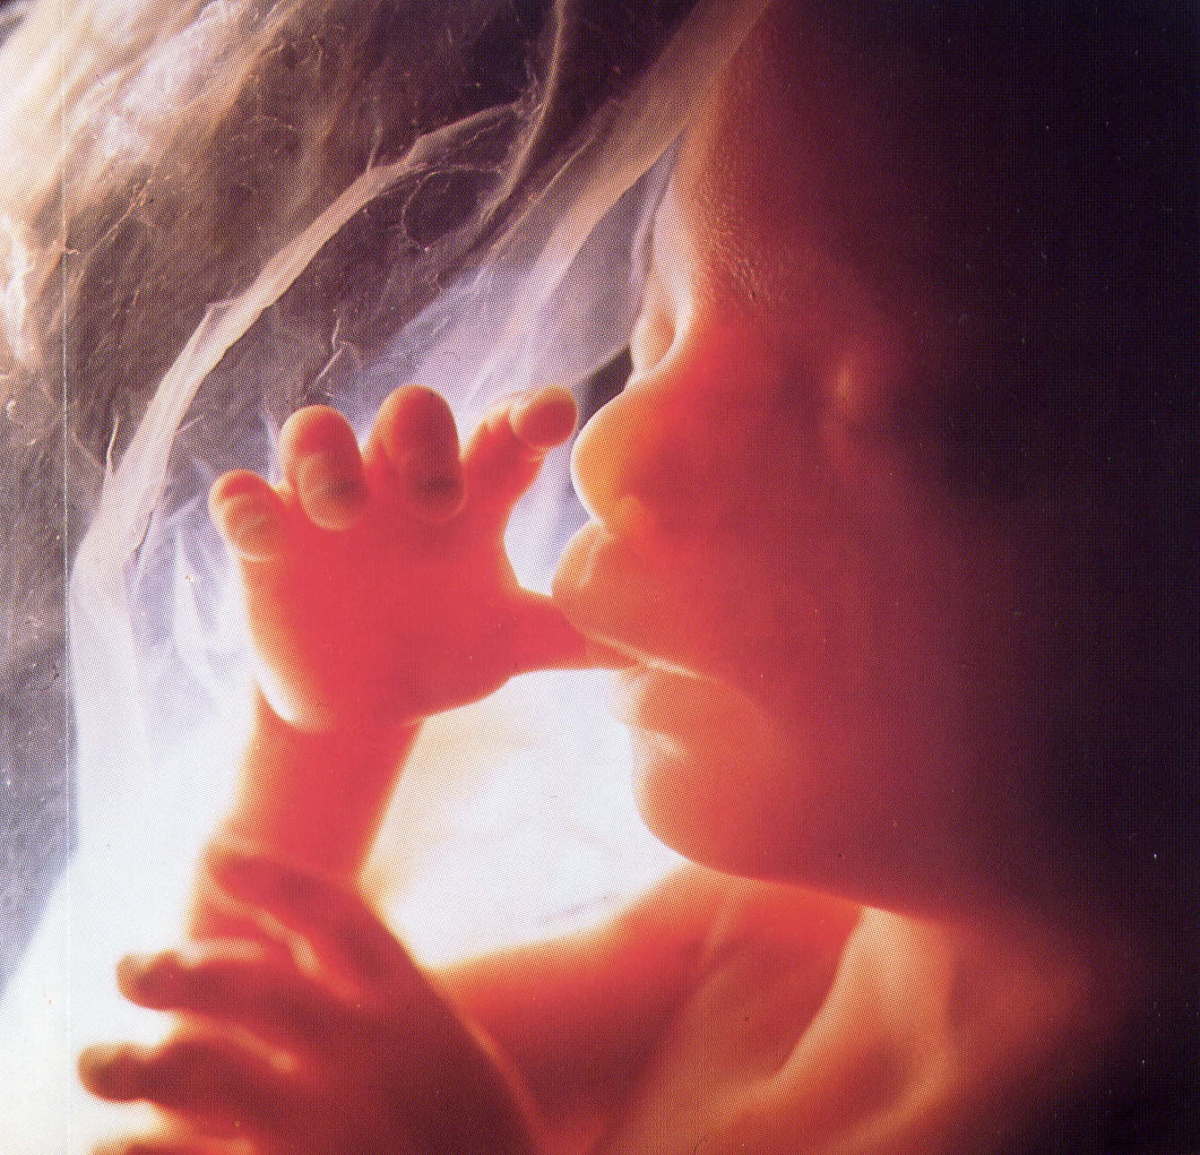 HUMAN BEING IN THE WOMB OF ITS MOTHER